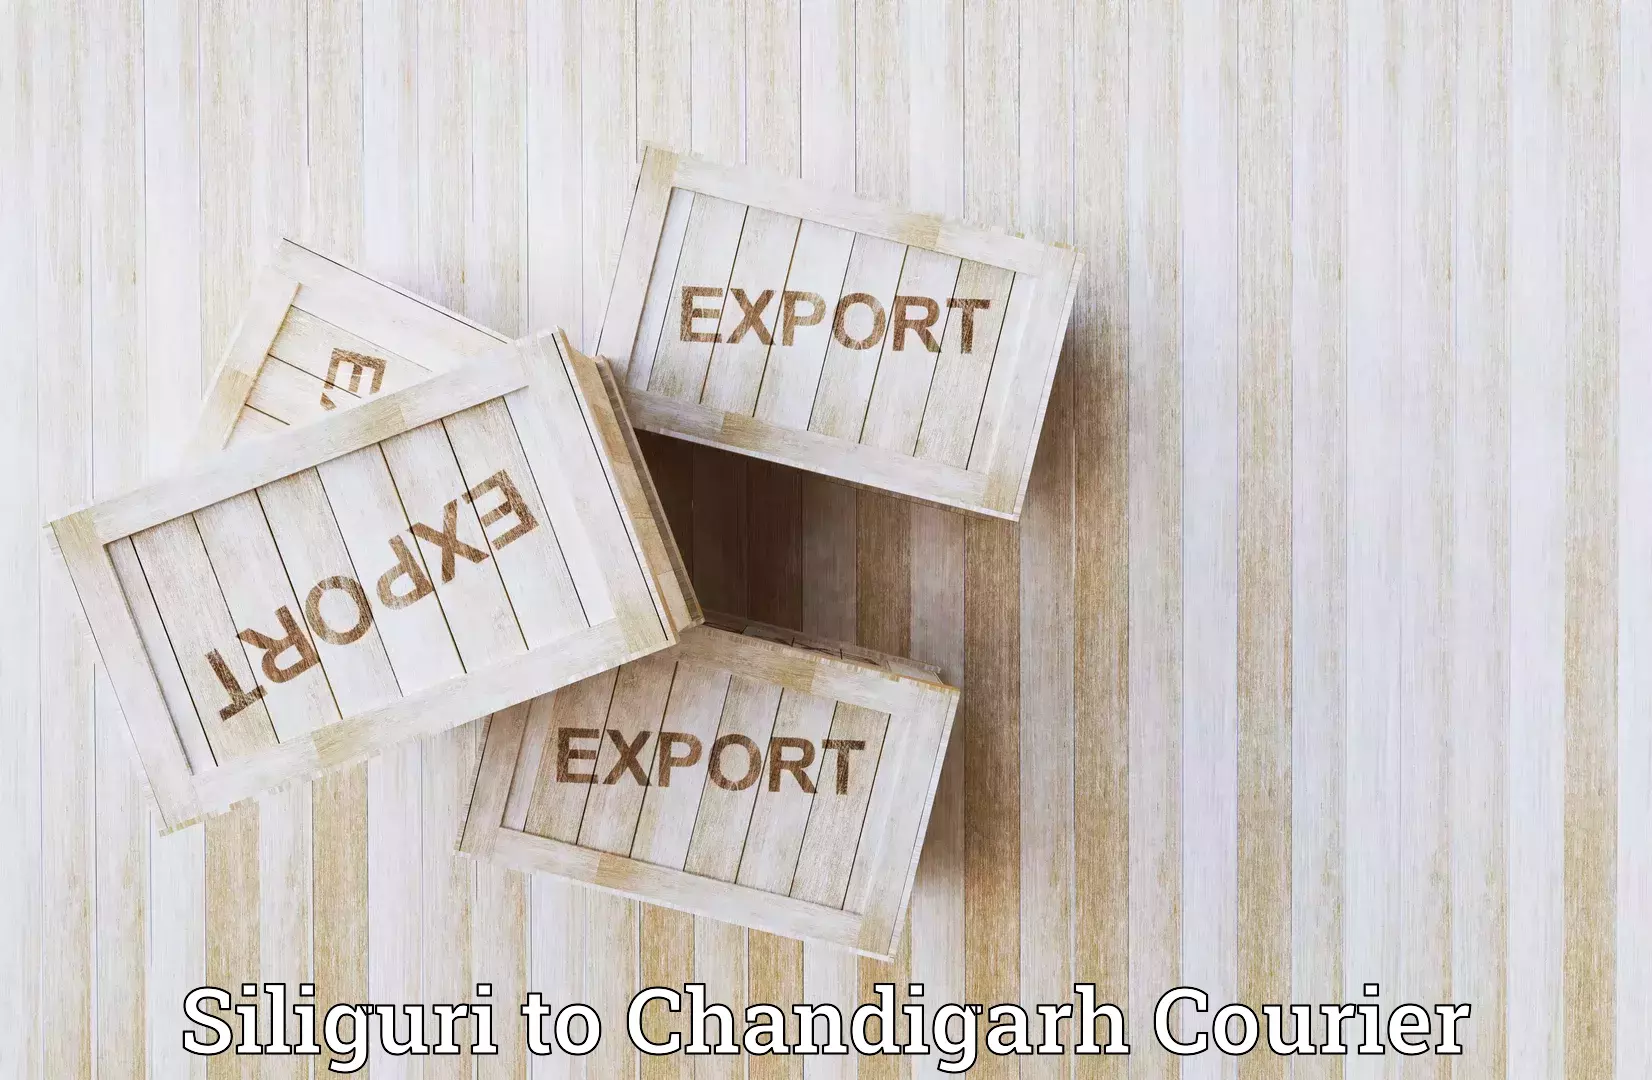 Fast-track shipping solutions Siliguri to Chandigarh